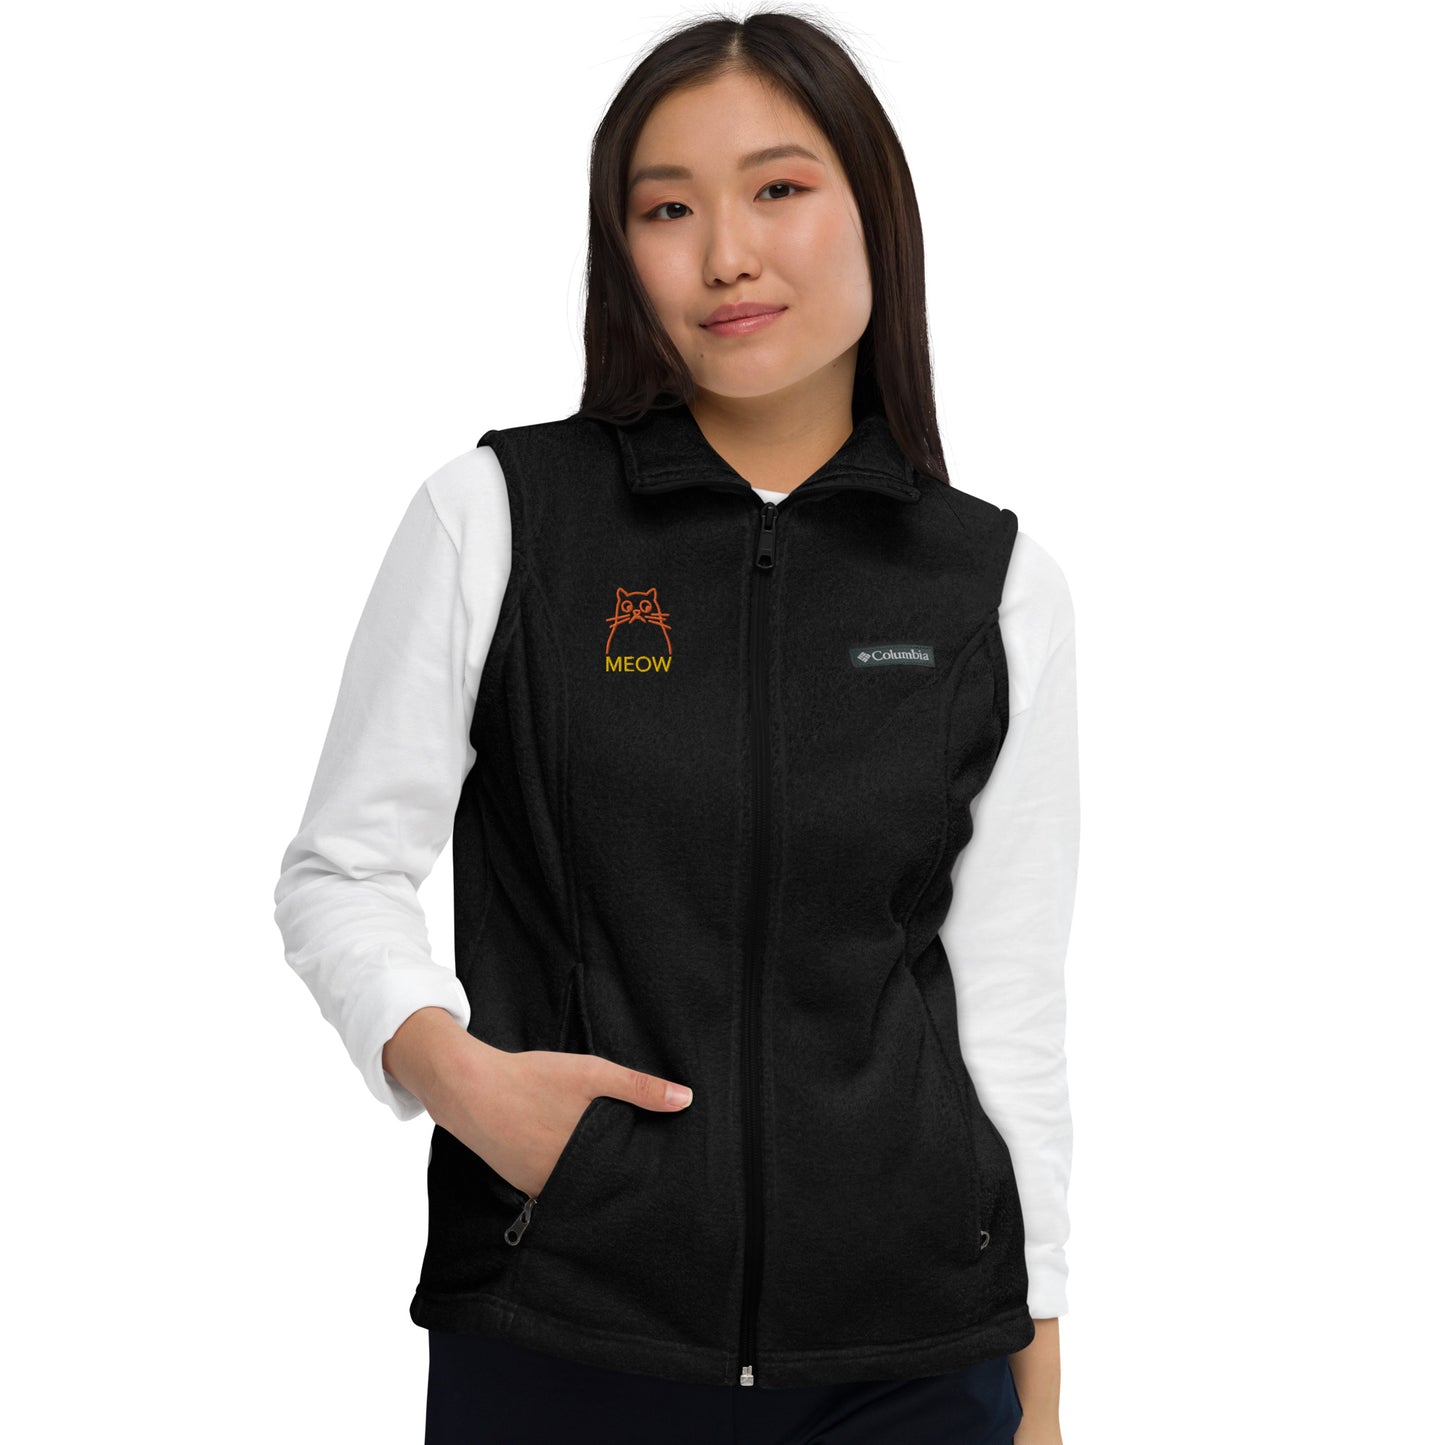 Women’s Columbia fleece vest , flat embroidery, gold color cute cat sketch/ yellow Meow